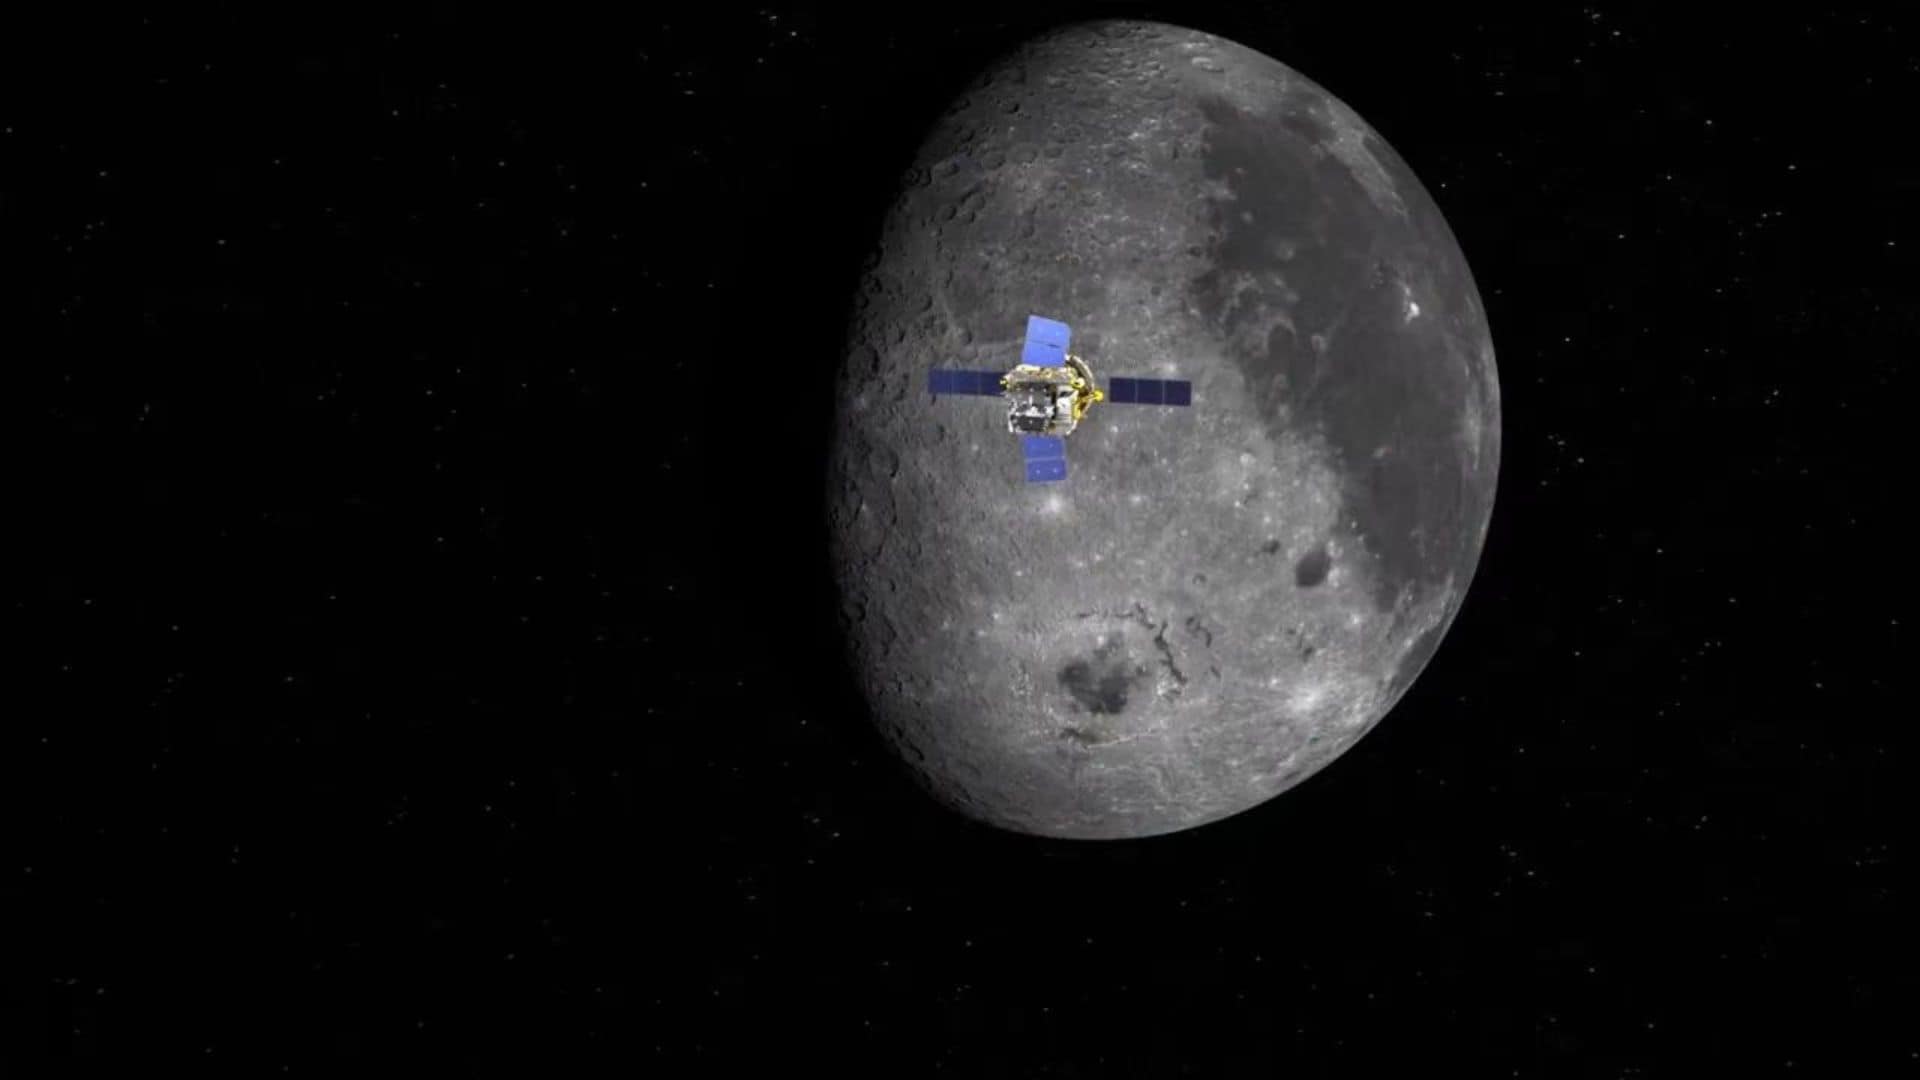 The Chang'e 6 spacecraft is on its way to the moon